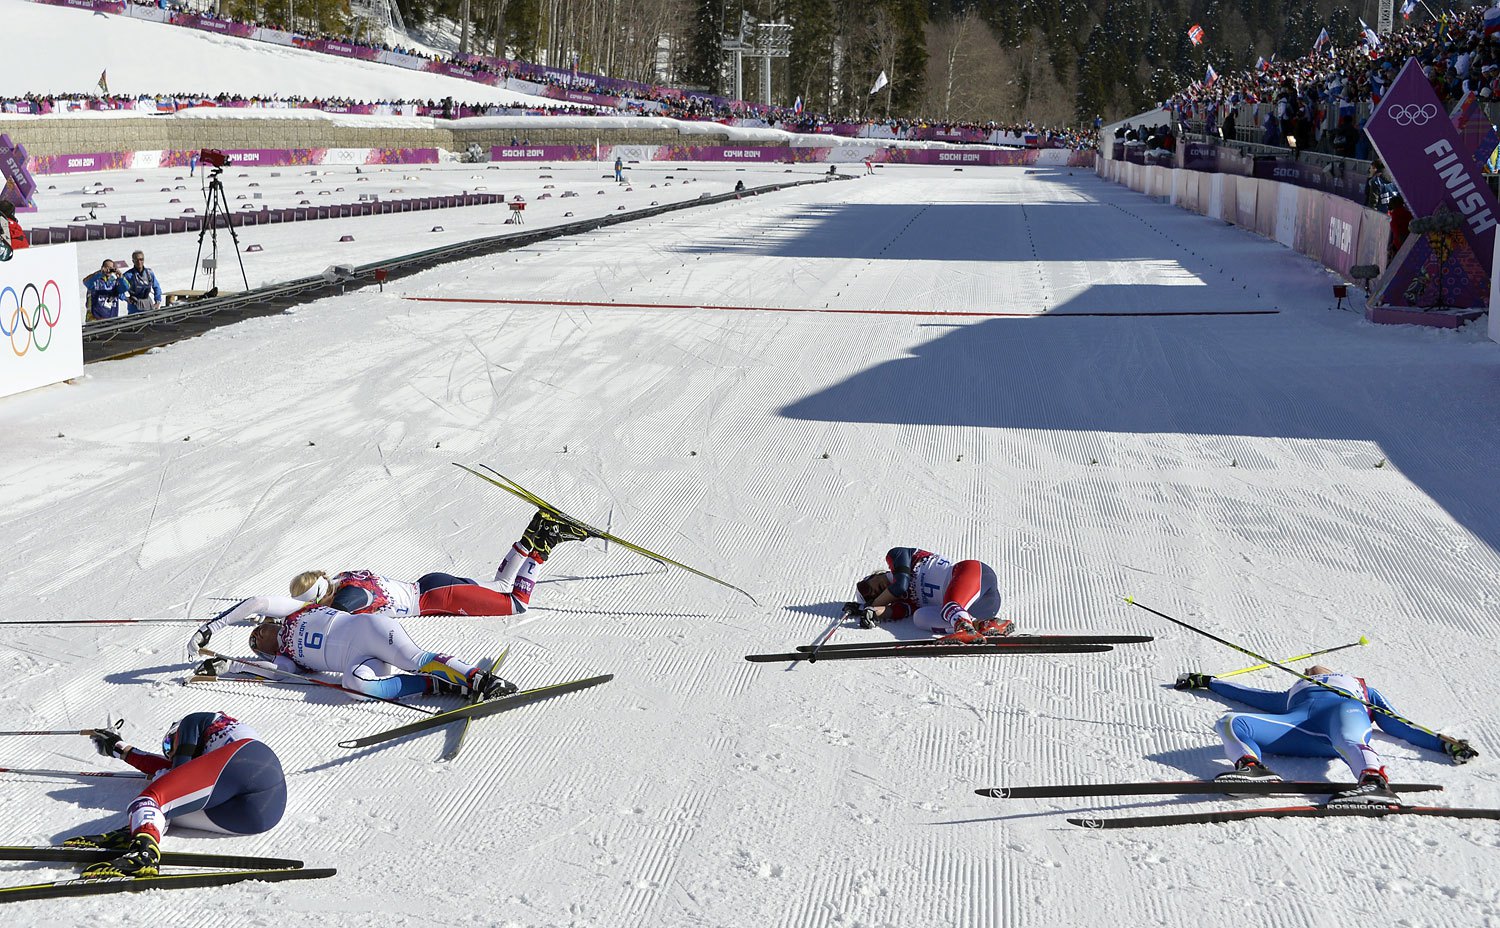 From left to right, Norway's Marit Bjoergen, Sweden's Charlotte Kalla, Norway's Therese Johaug, Norway's Heidi Weng and Finland's Aino-Kaisa Saarinen react after the Women's Cross-Country Skiing 7,5km + 7,5km Skiathlon at the Laura Cross-Country Ski and Biathlon Center on Feb. 8, 2014.